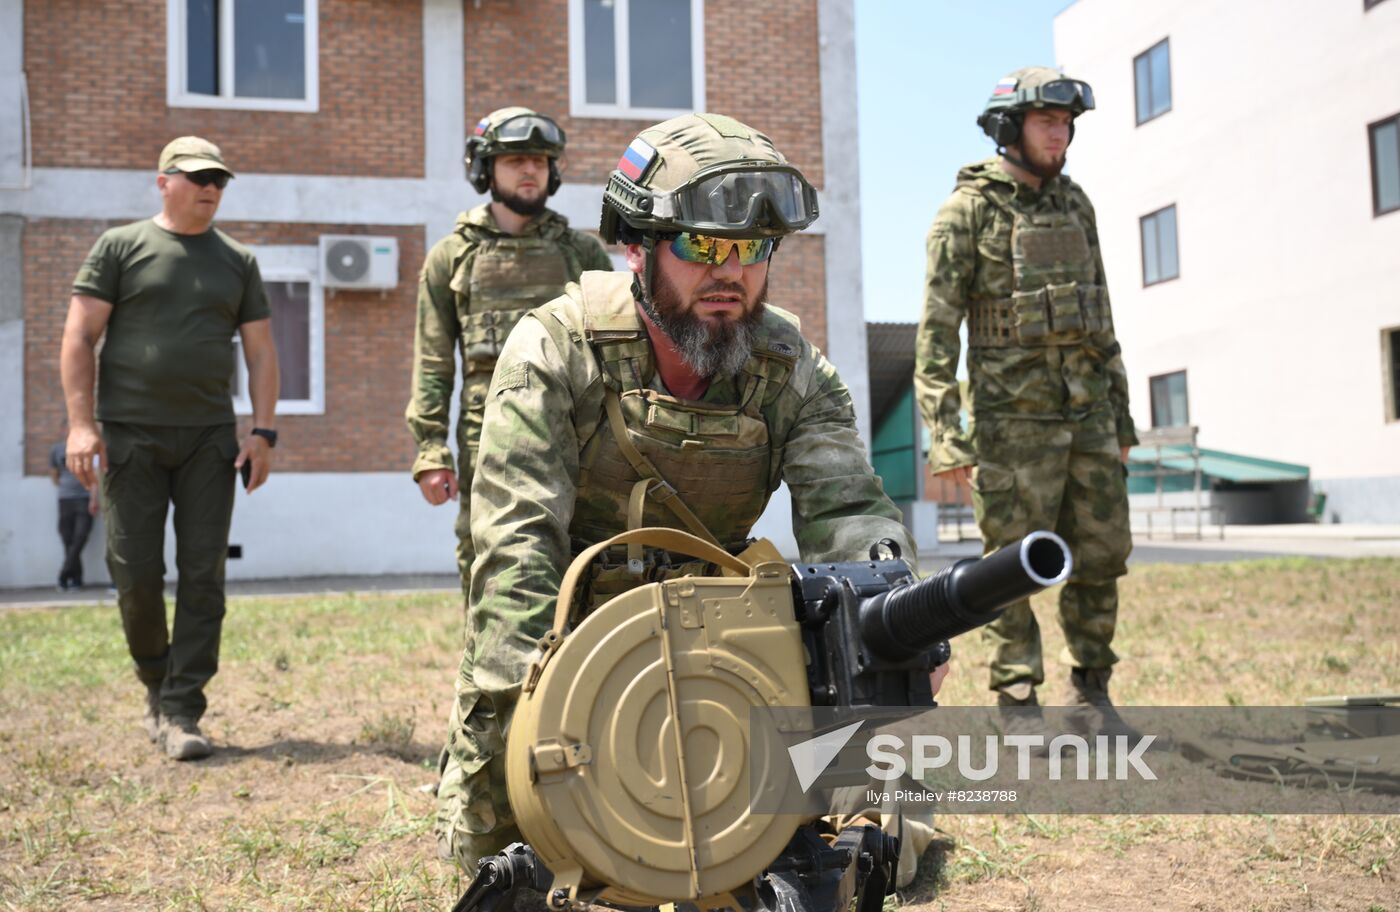 Russia Special Forces University